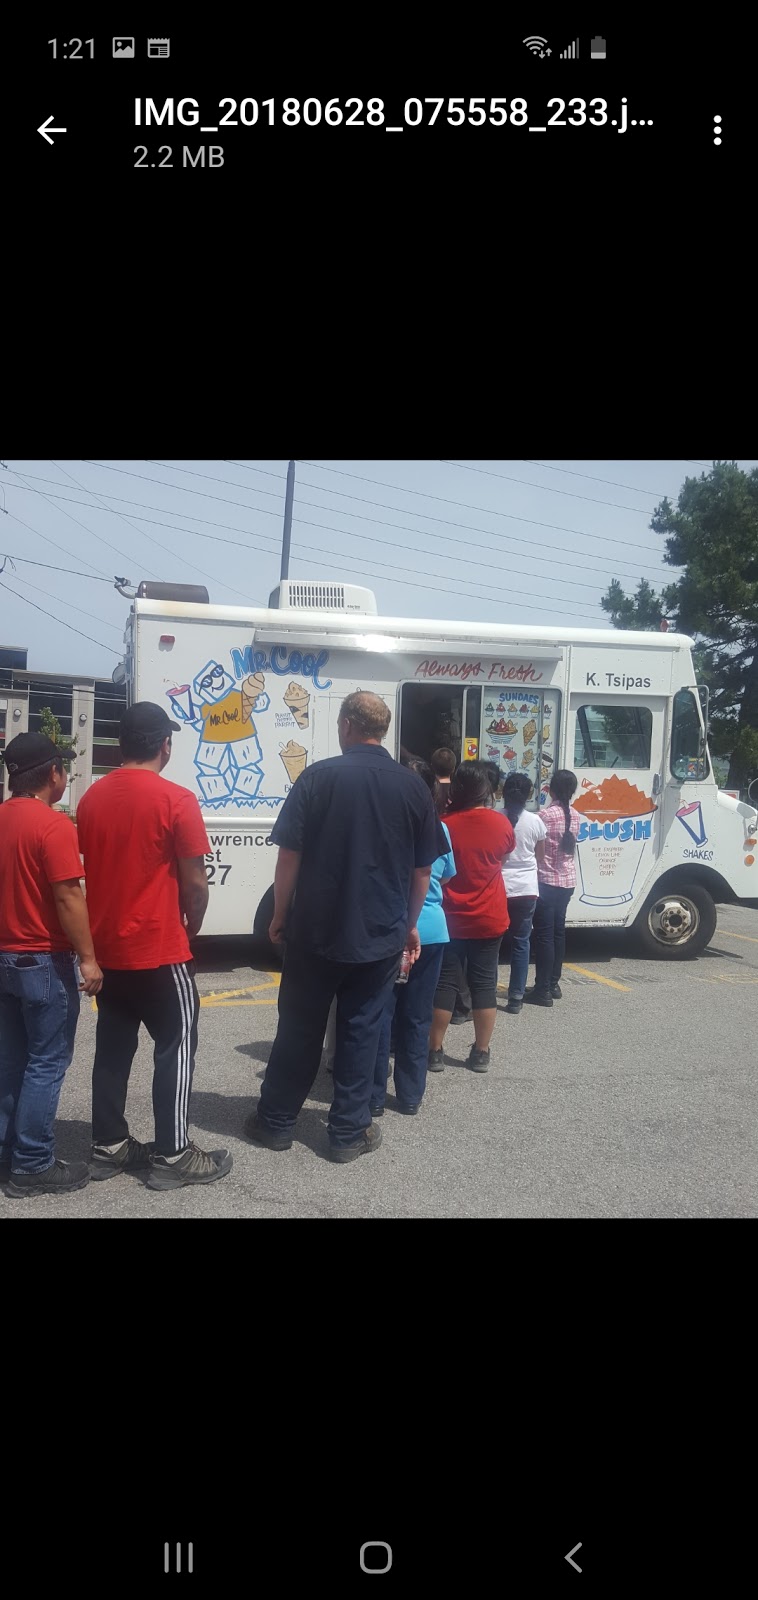 Xtreme Ice Cream - Ice Cream Truck Service | 15 Harry Sanders Ave, Whitchurch-Stouffville, ON L4A 0J8, Canada | Phone: (416) 629-3218